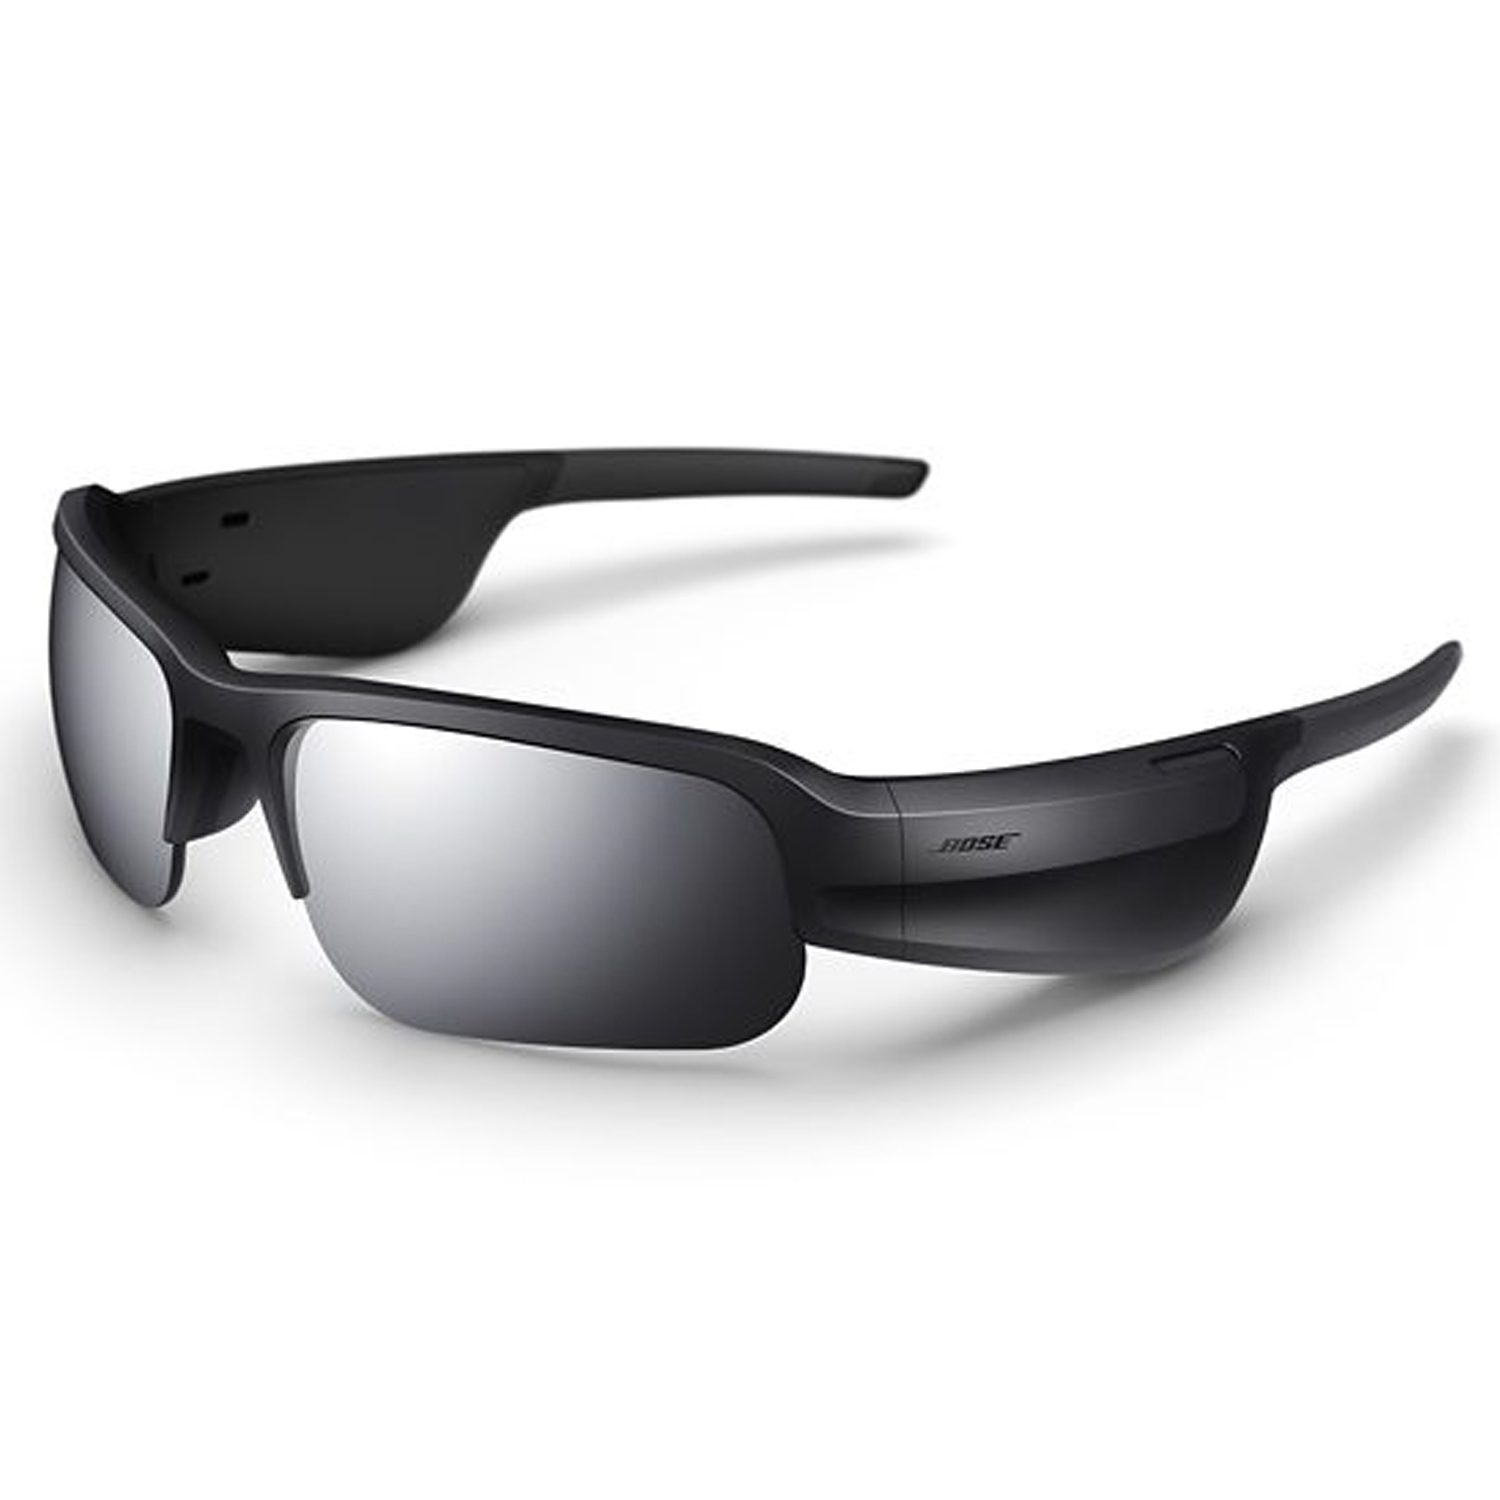 Bose Frames Tempo Bluetooth Sports Sunglasses with Polarized Lenses, Black - image 1 of 13